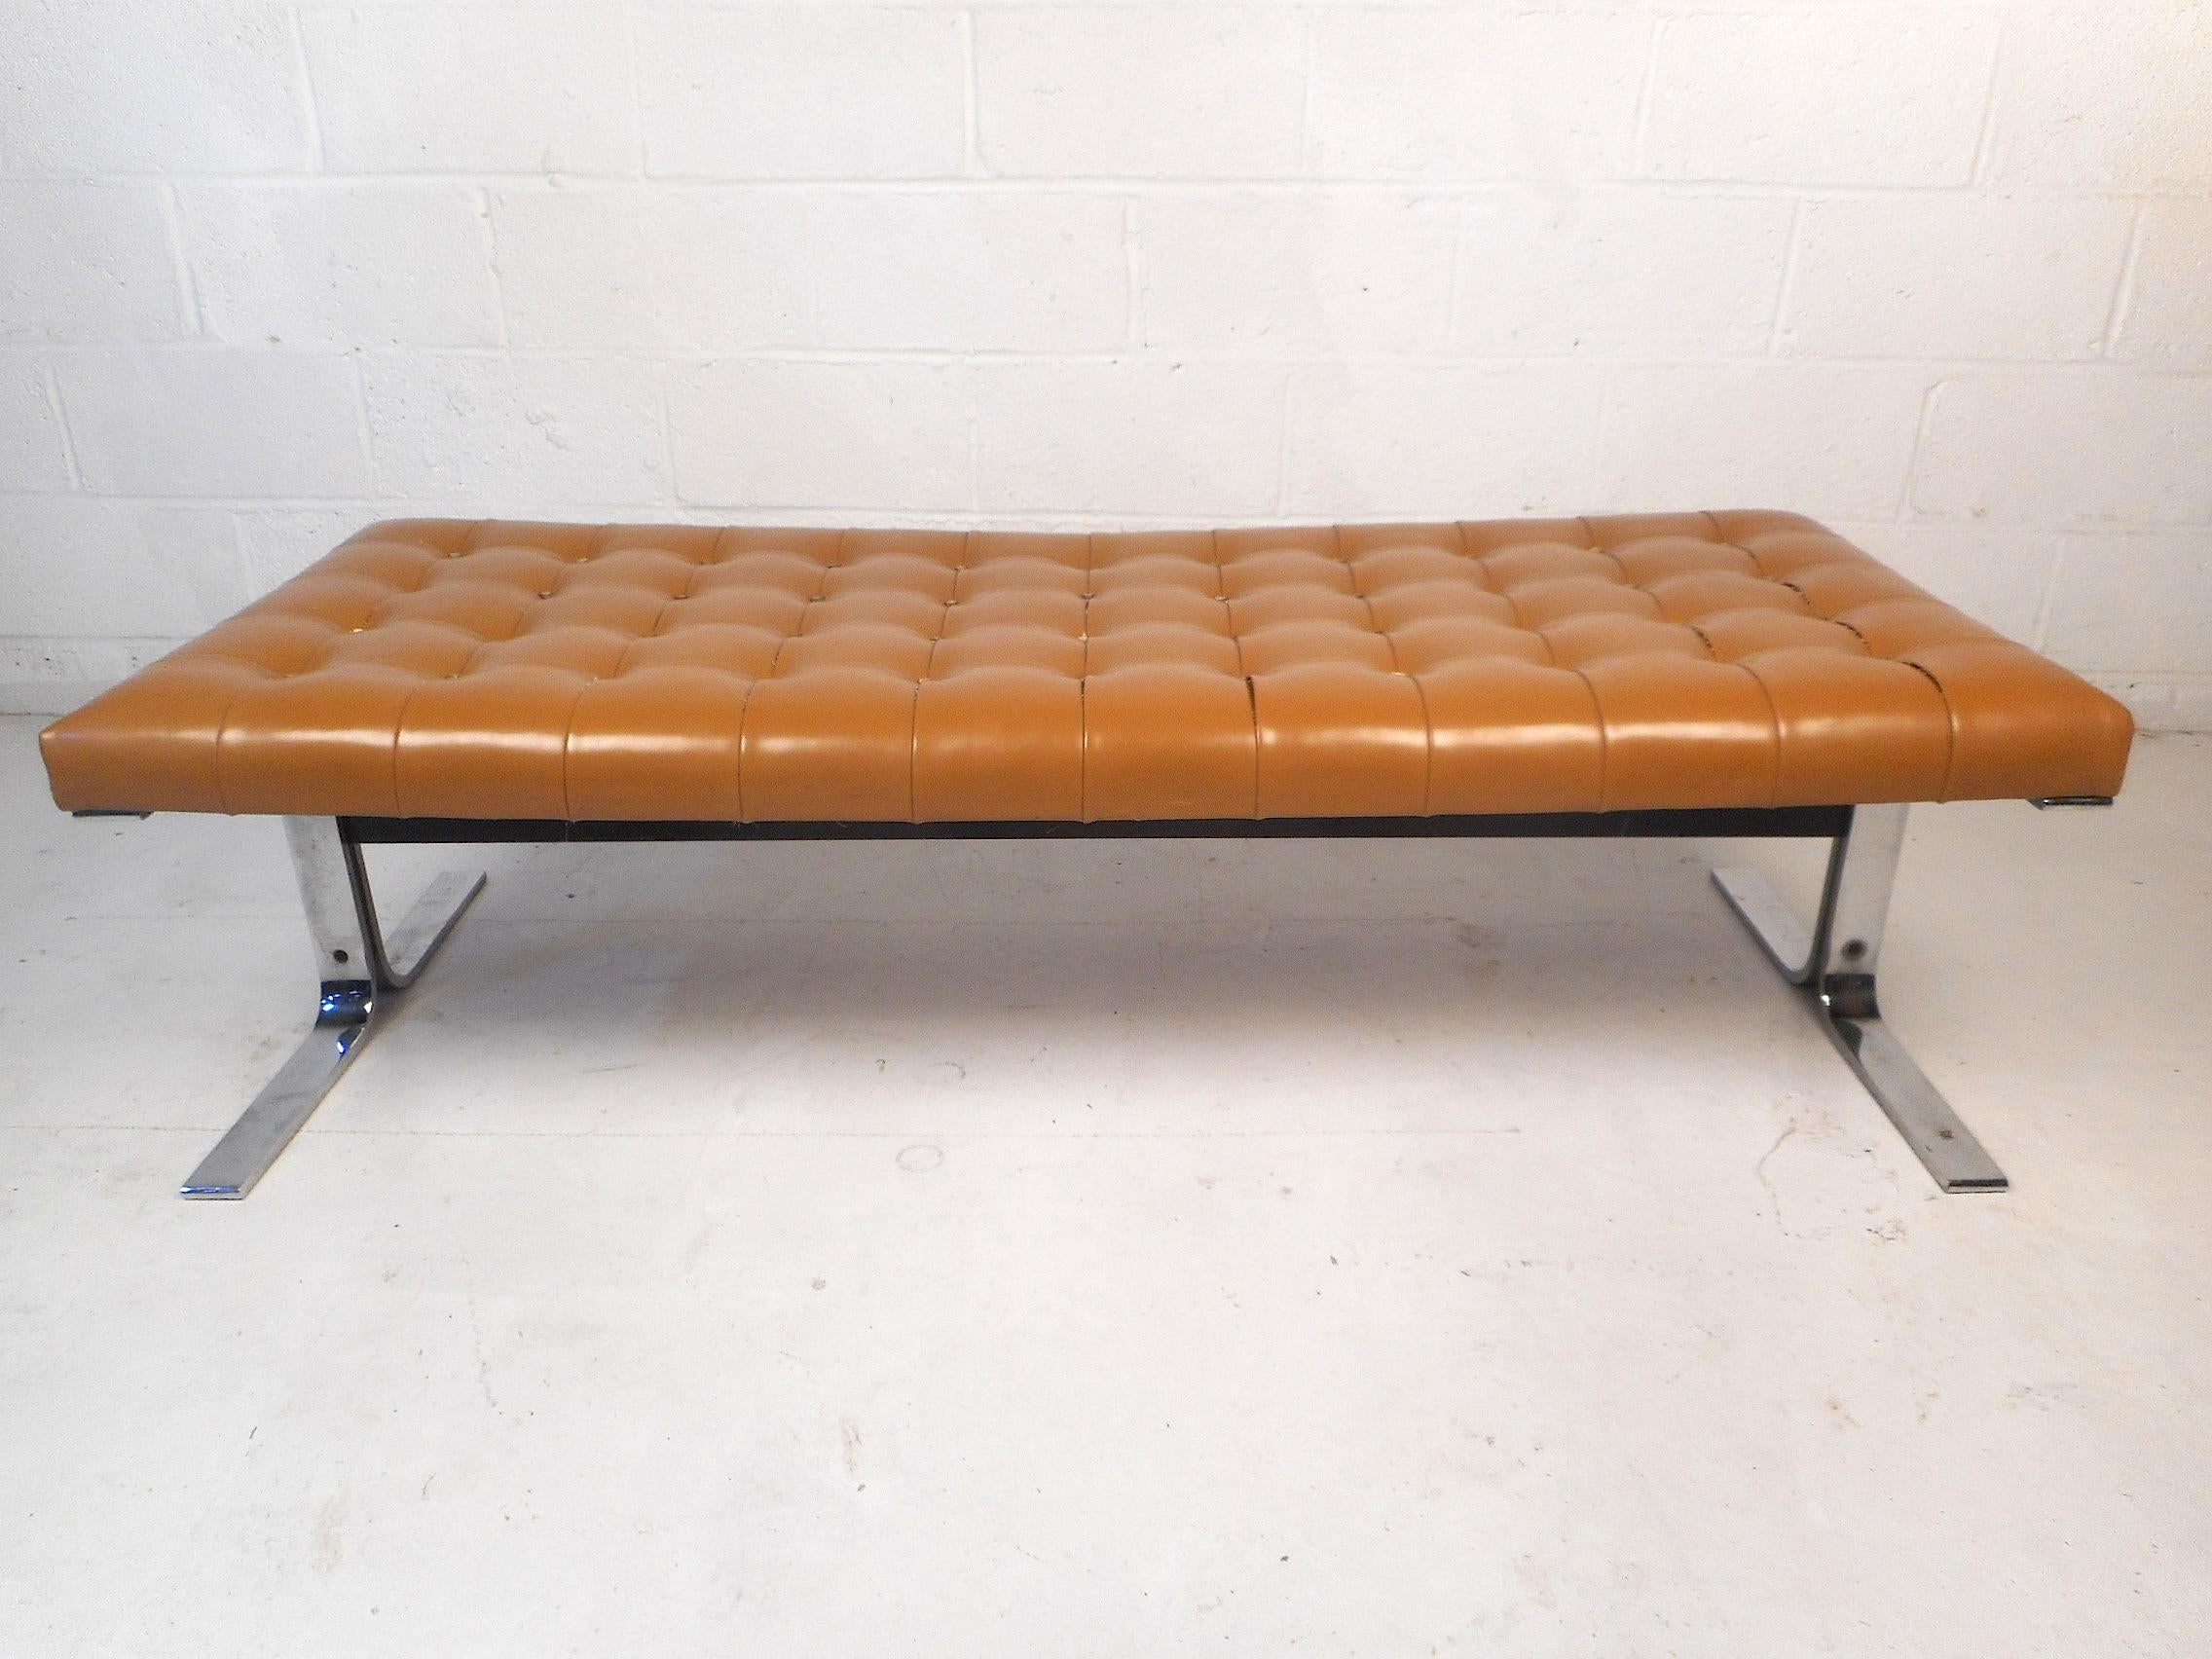 This unique vintage bench features a tufted vinyl upholstery covering the seating surface ensuring comfort. A sturdy chrome cantilevered base provides stability and style. A distinctive addition to any home, business, or office. Please confirm item